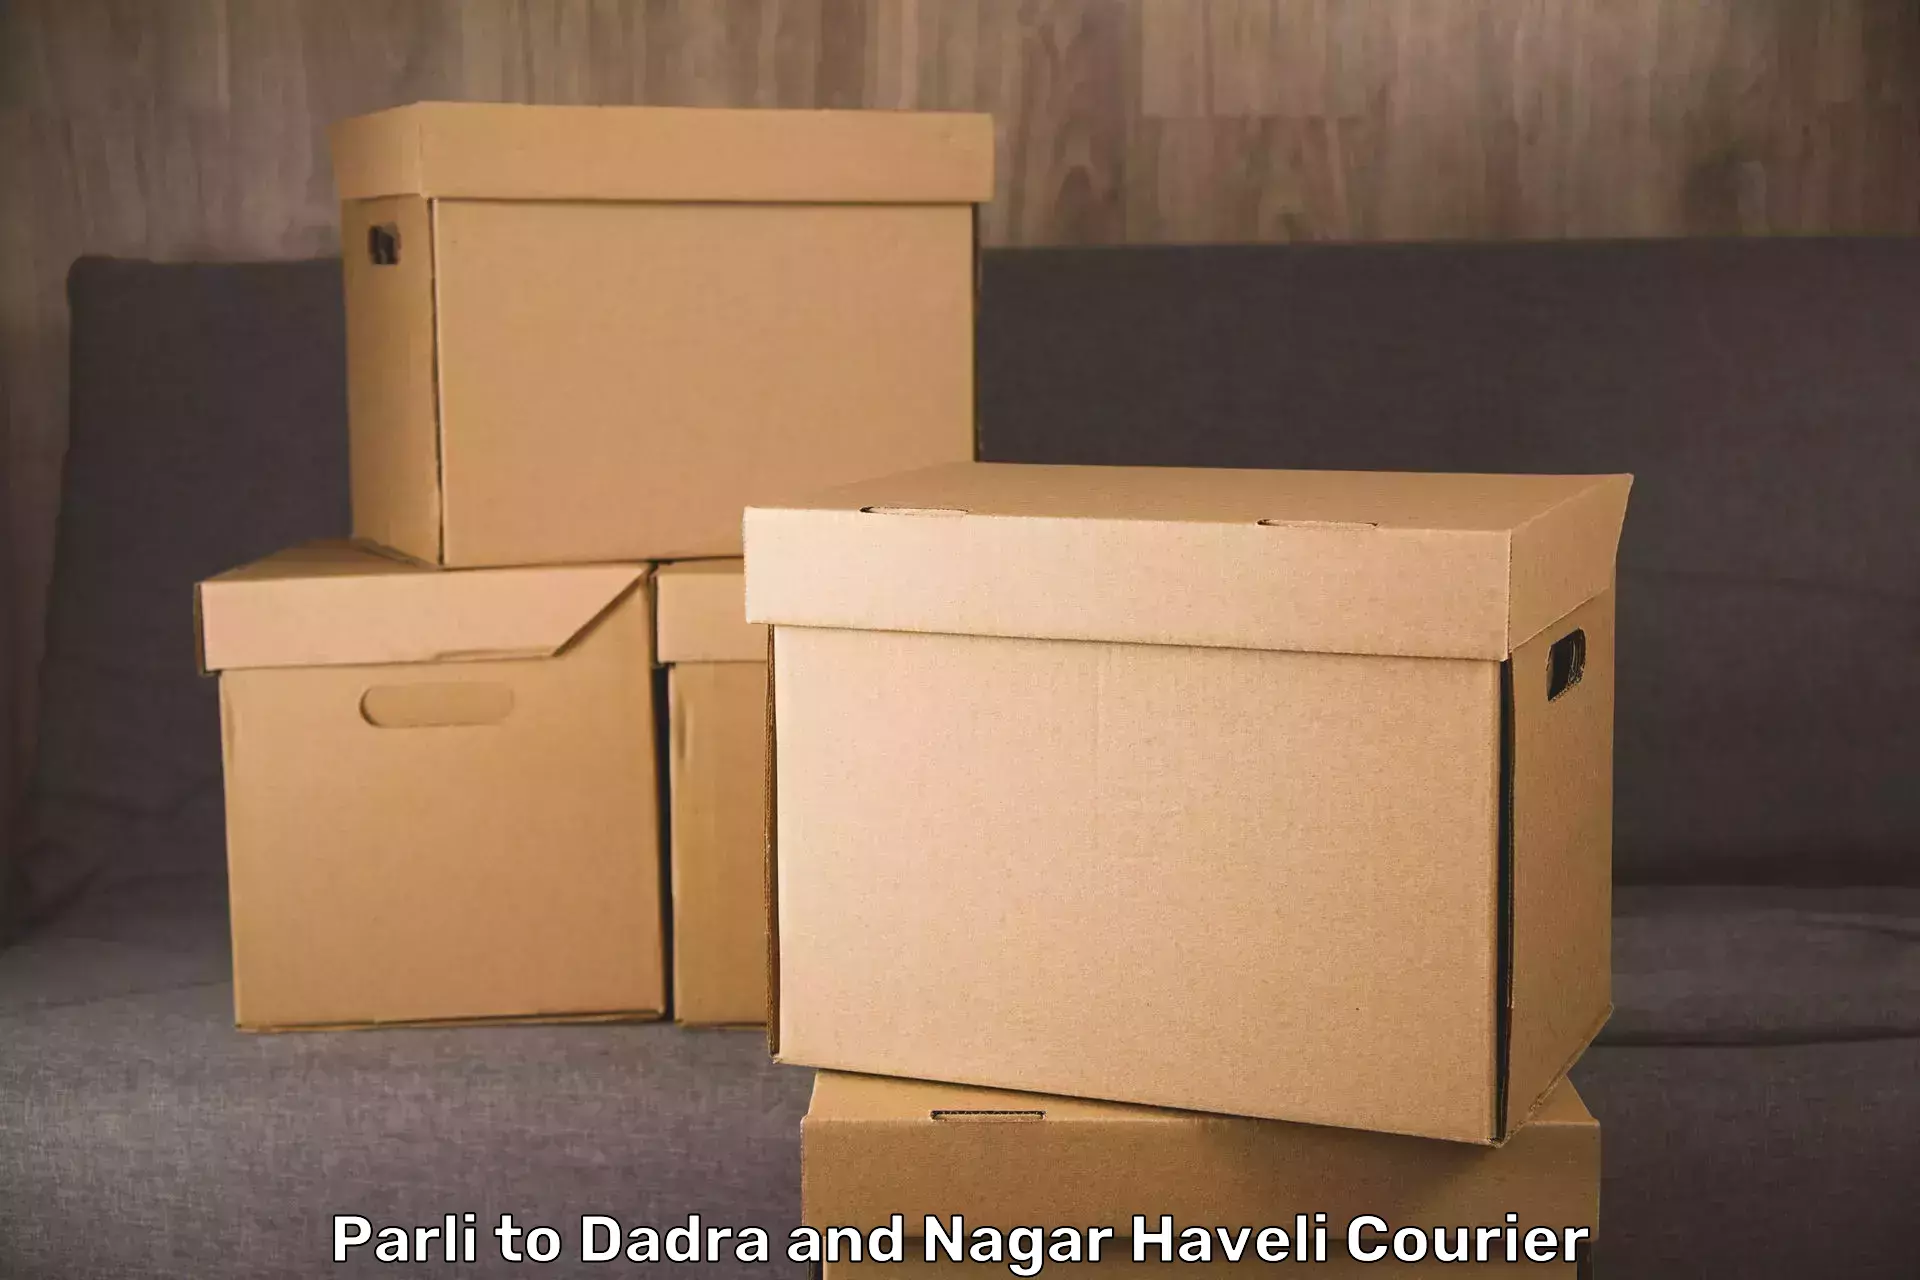 Luggage delivery estimate in Parli to Dadra and Nagar Haveli